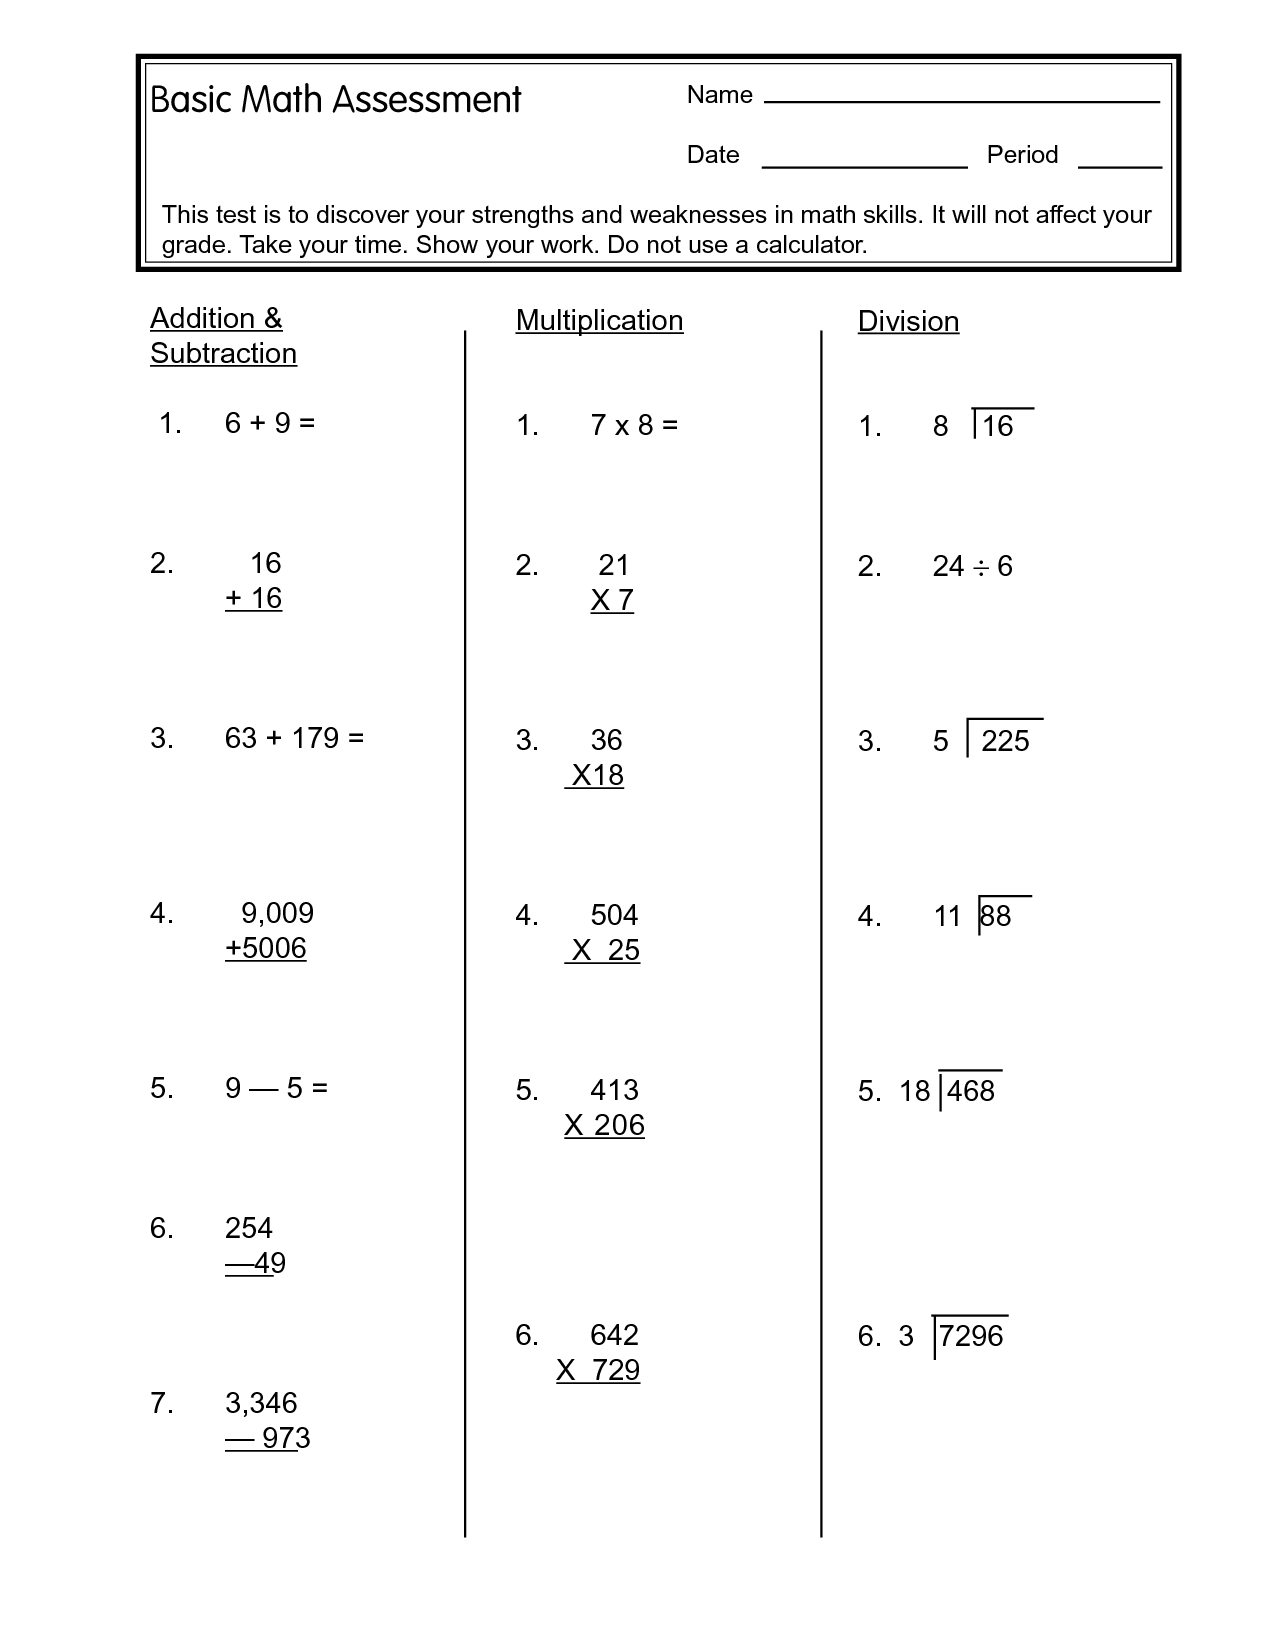 7-best-images-of-6th-grade-math-test-printable-6th-grade-math